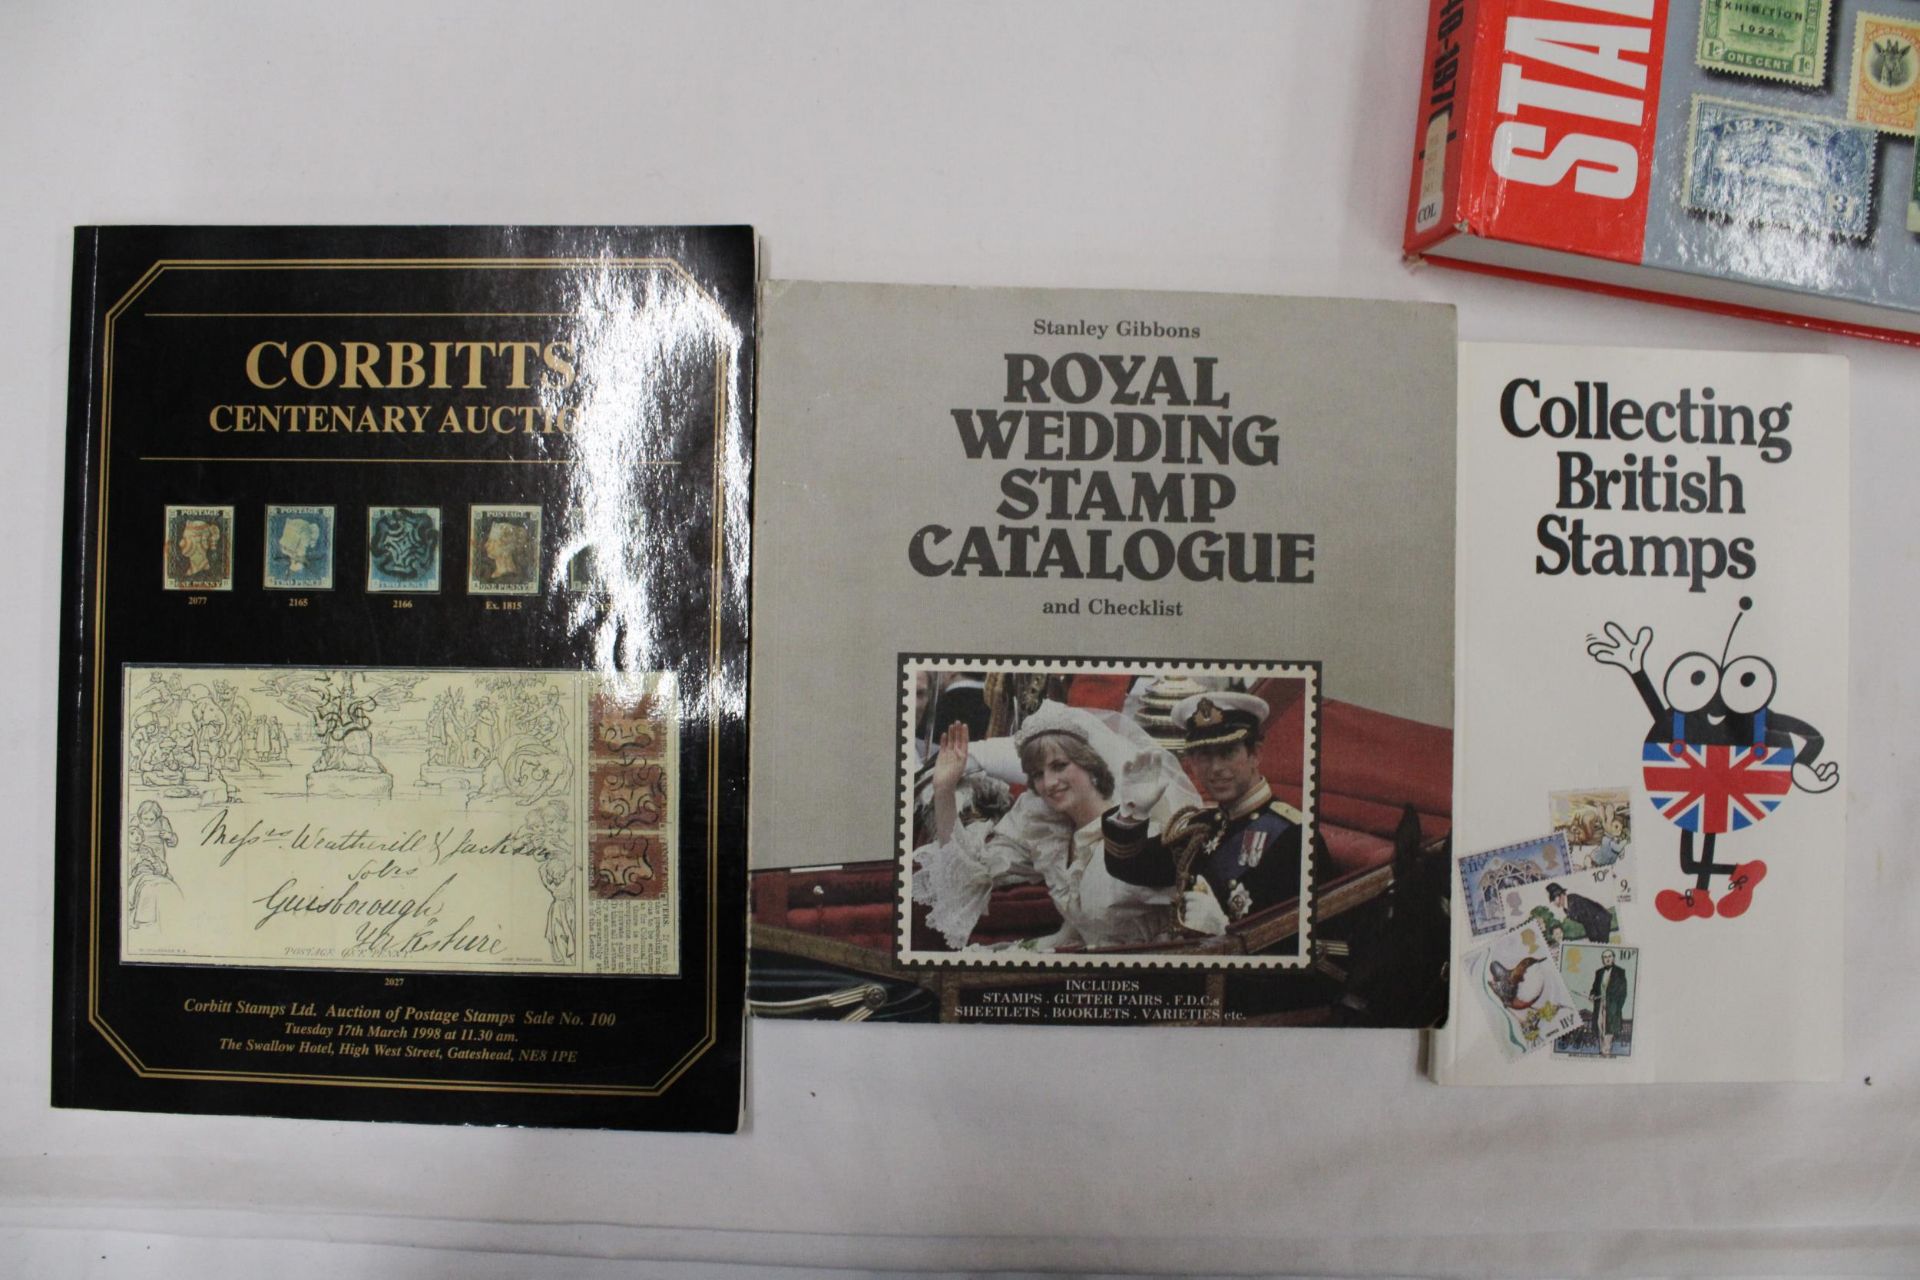 FOUR STAMP BOOKS TO INCLUDER COLLECTING BRITISH STAMPS, ROYAL WEDDING STAMP CATALOGUE, CORBITTS - Image 4 of 4